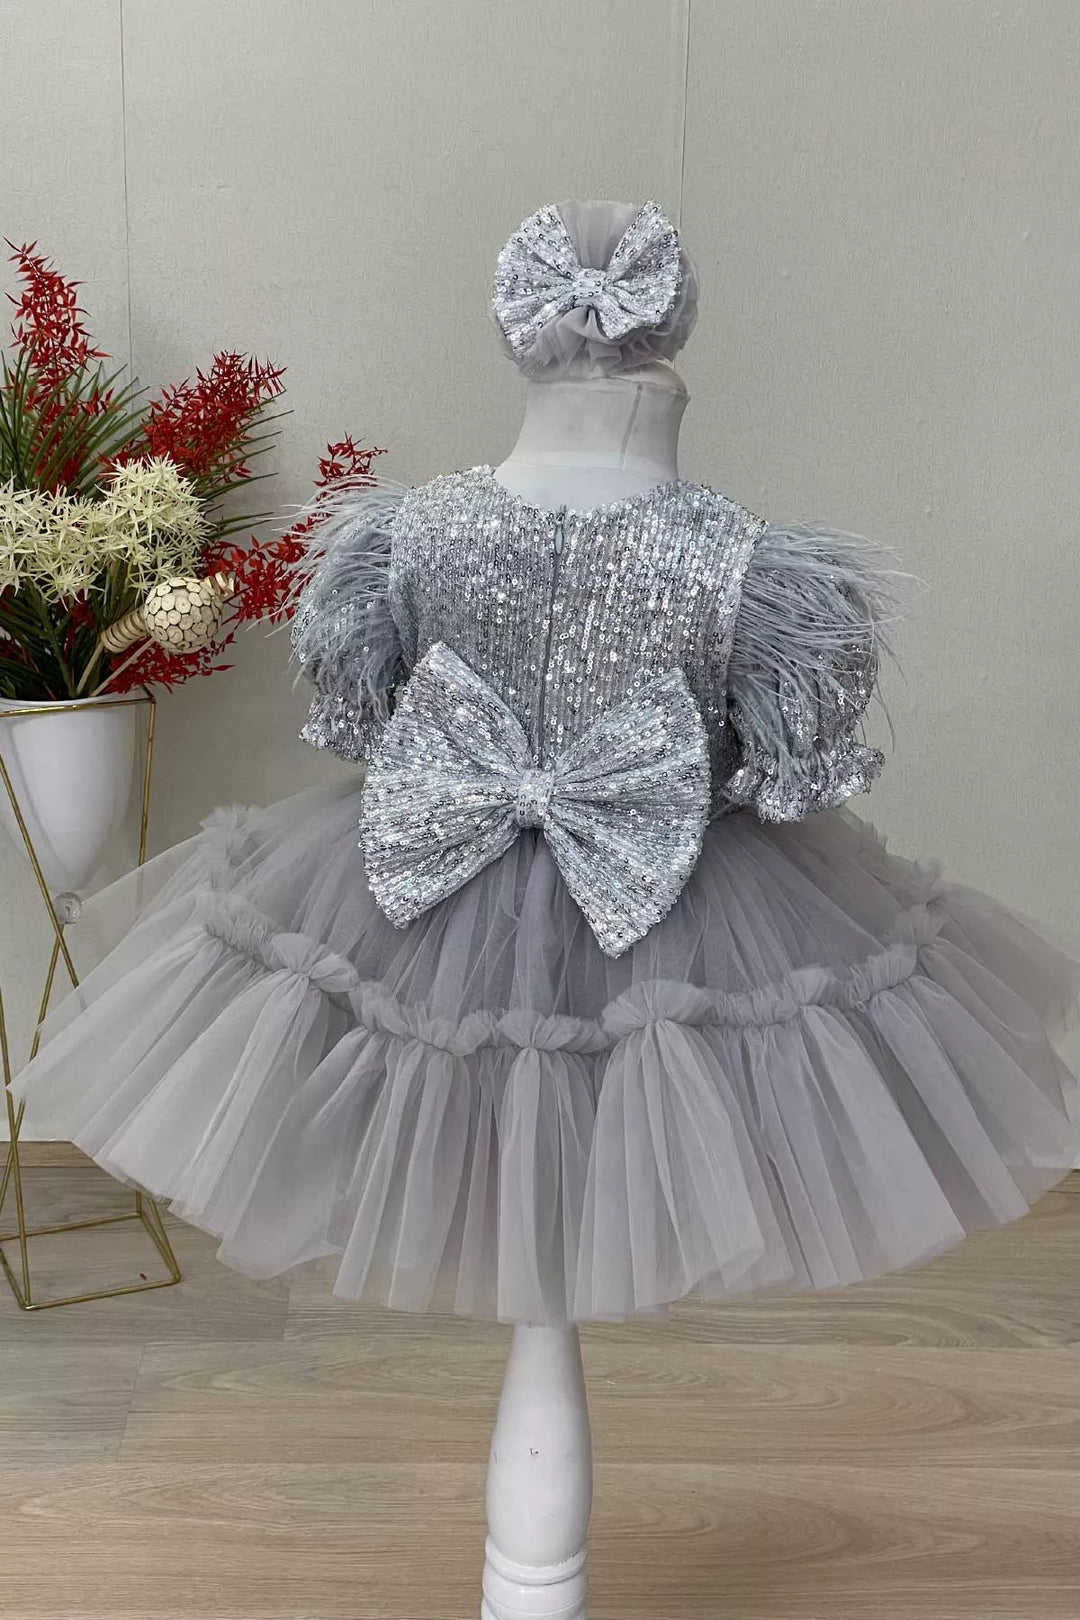 Back view of a gray girl dress that has sequins, half sleeve, feathers, V-neck, bow, and puffy skirt